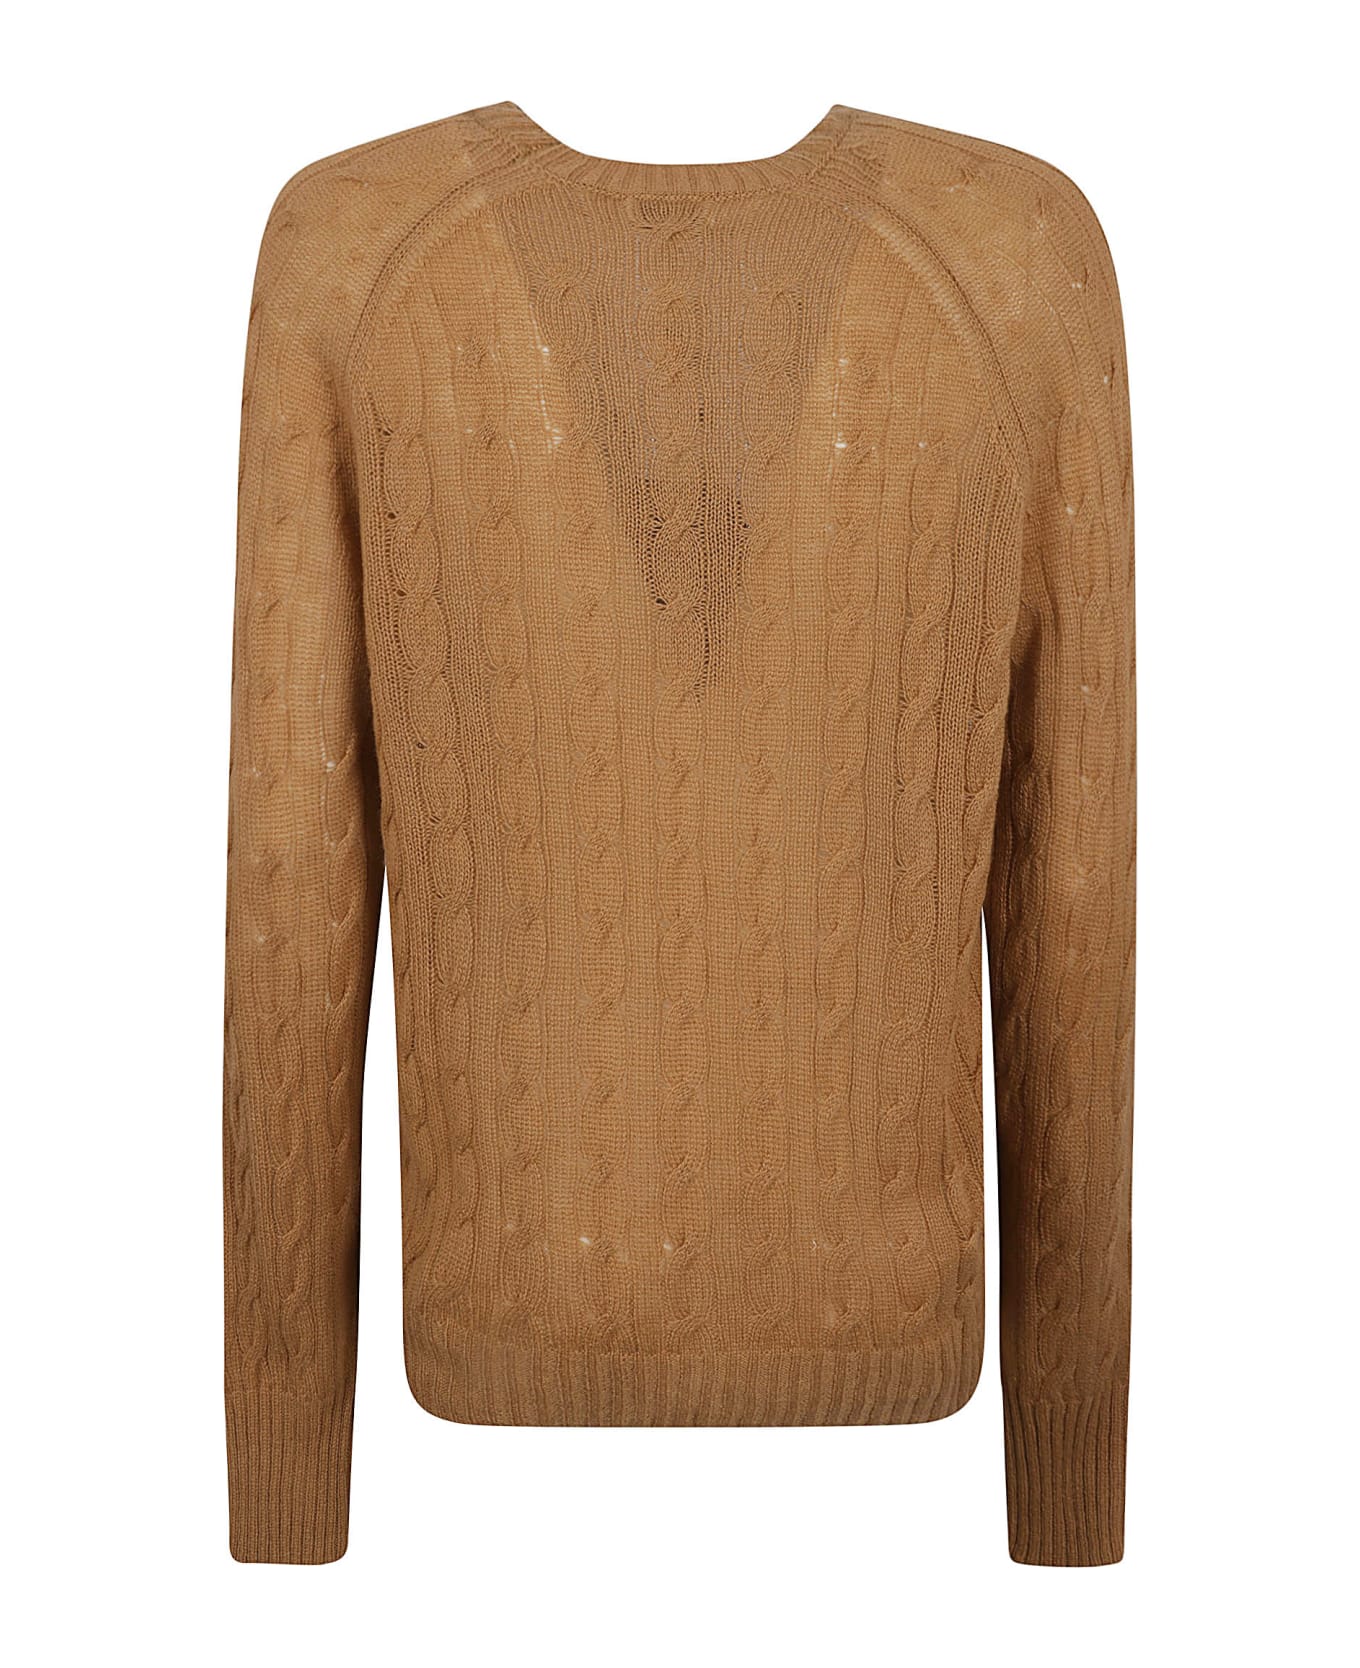 Etro Rib Trim Logo Embroidered Cable-knit Sweater - Beige